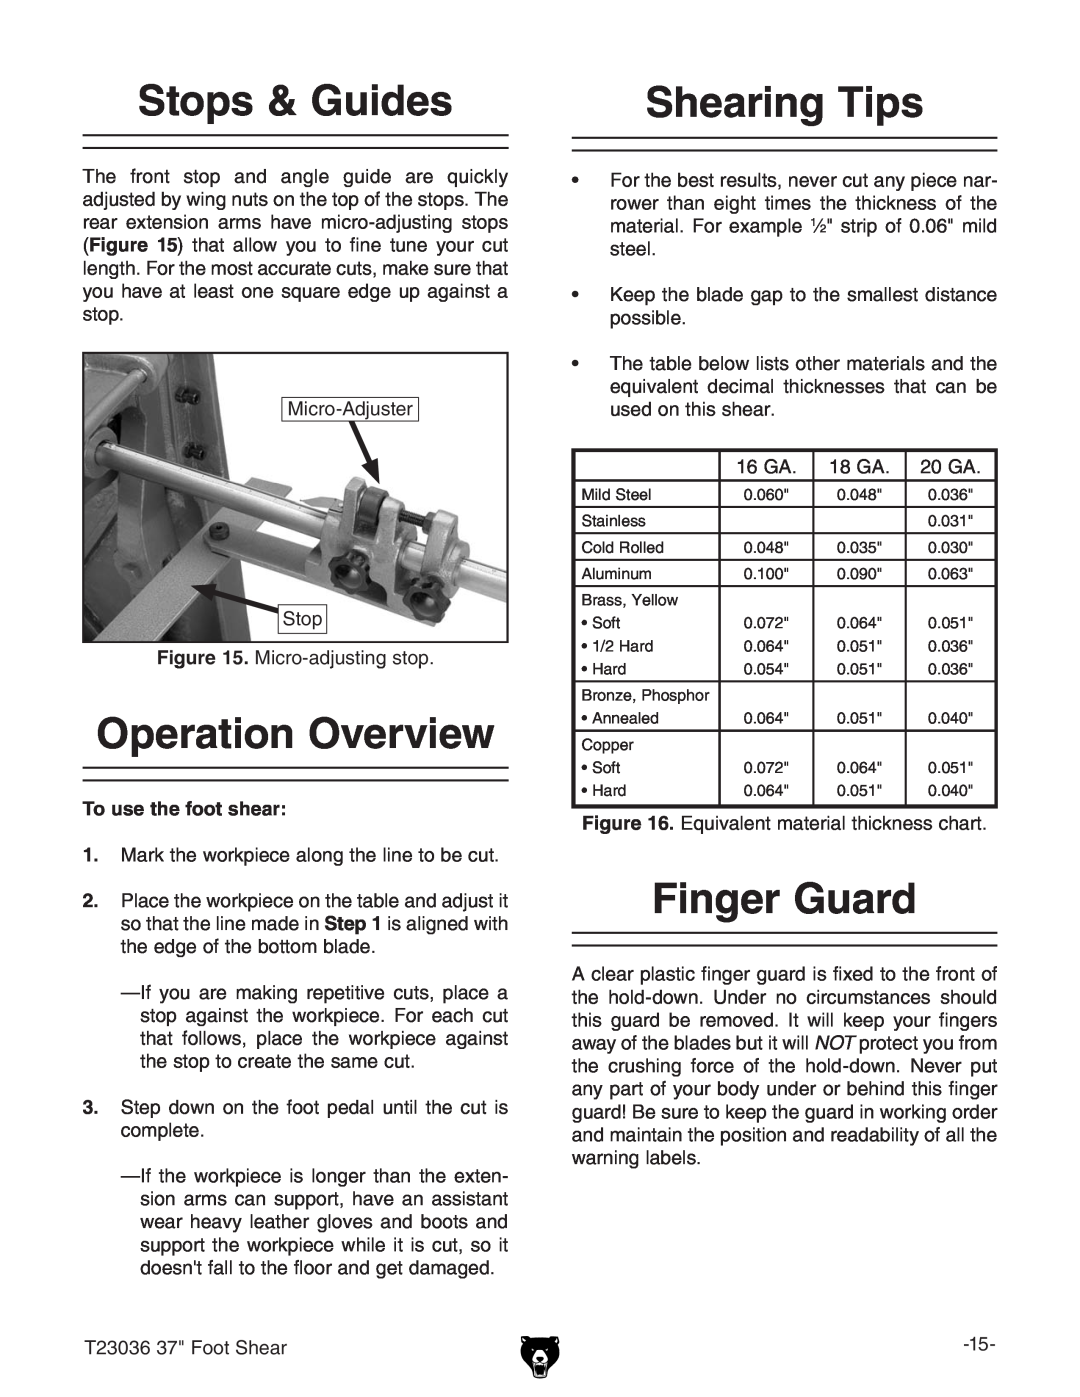 Grizzly T23036 owner manual Stops & Guides, Operation Overview, Shearing Tips, Finger Guard, To use the foot shear 